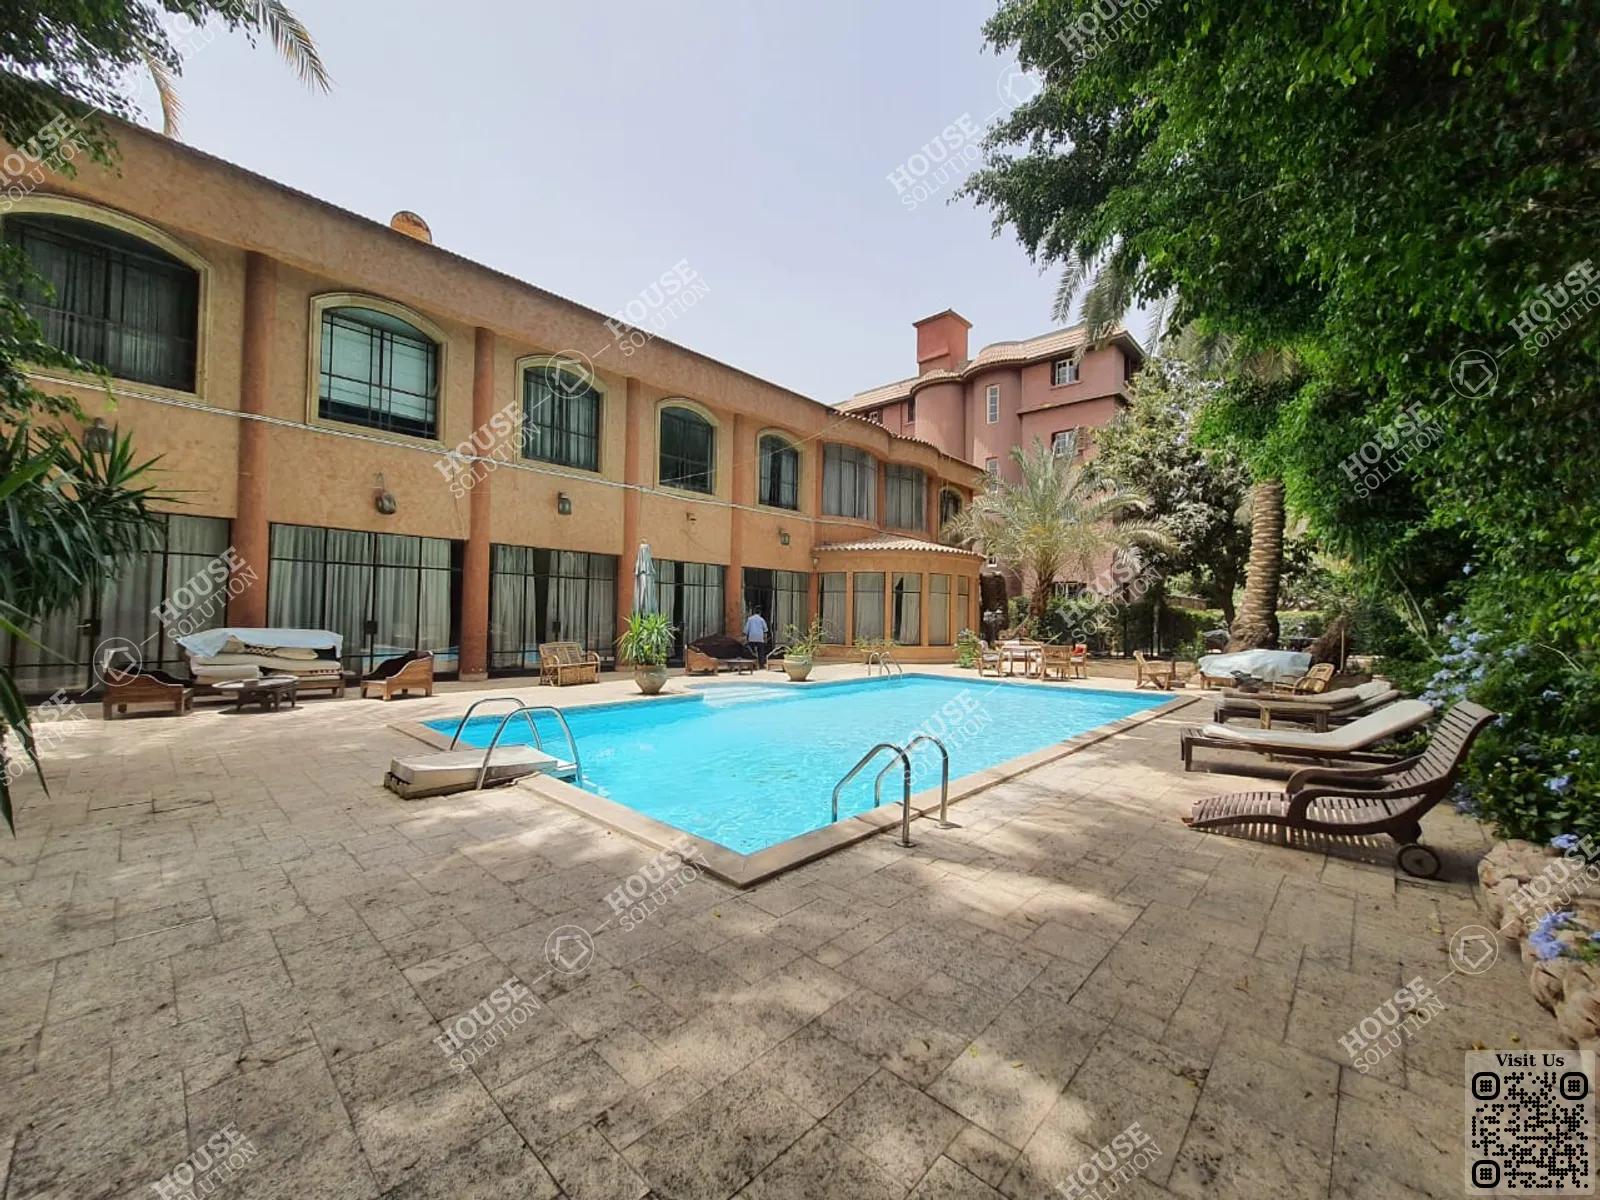 SHARED SWIMMING POOL  @ Apartments For Rent In Maadi Maadi Sarayat Area: 180 m² consists of 3 Bedrooms 3 Bathrooms Furnished 5 stars #5290-1